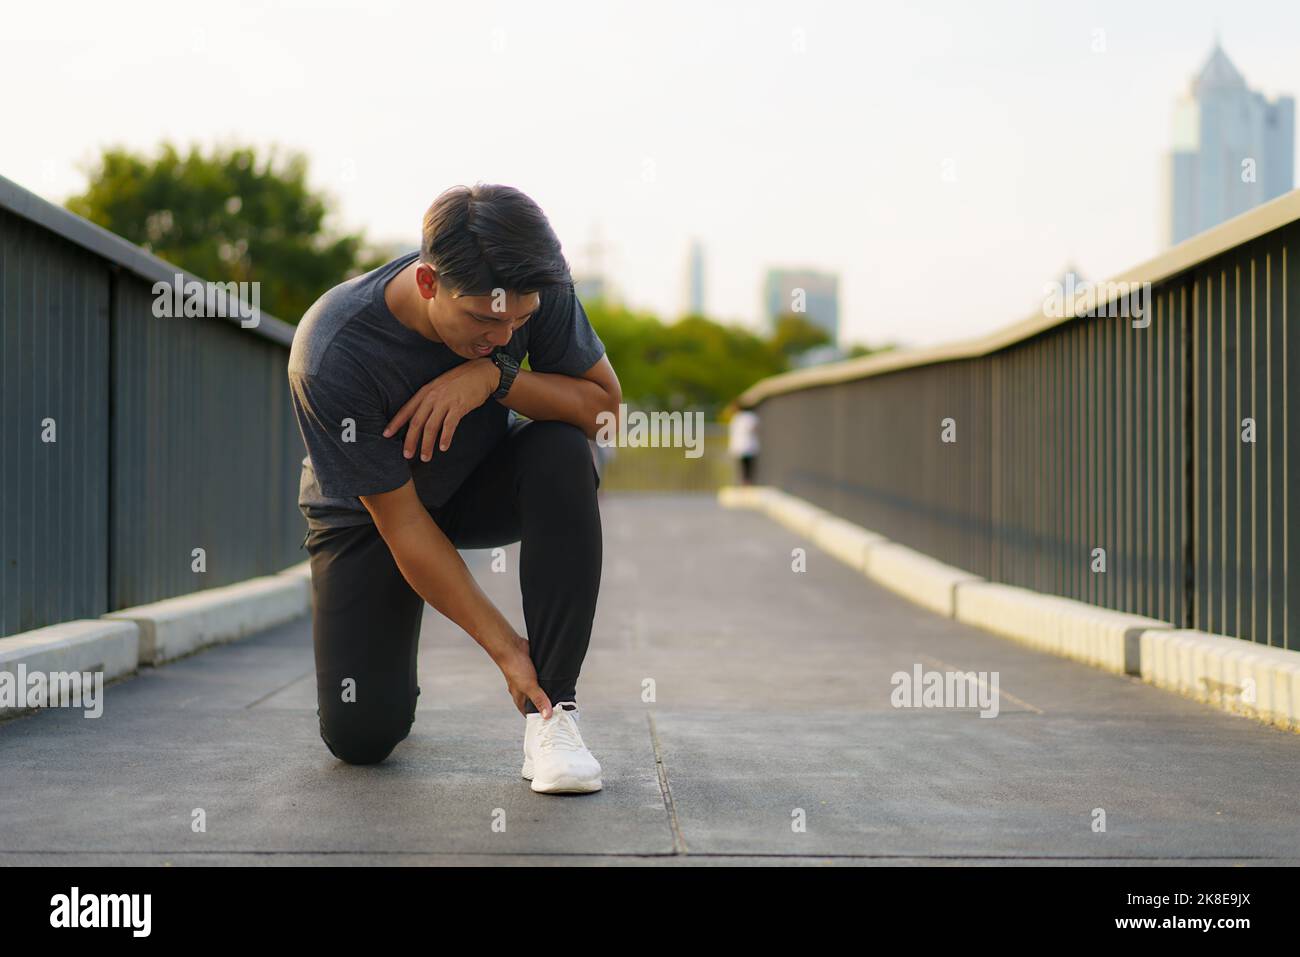 Asian Runner suffering ankle injury after sport outdoors in a city outskirts park Stock Photo